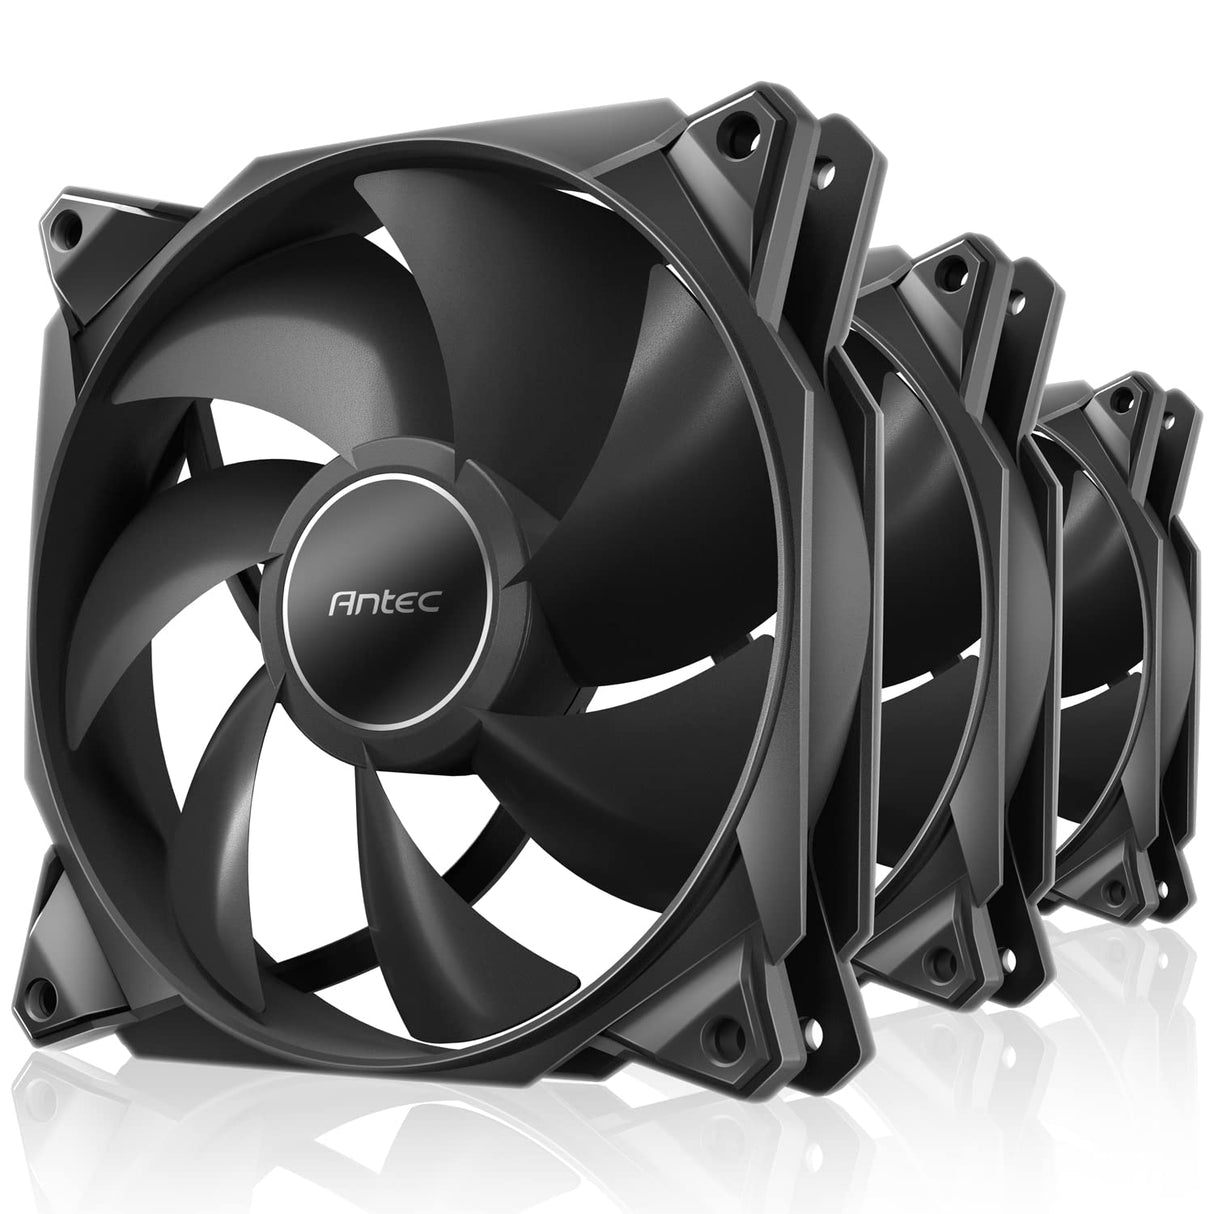 Antec PWM PC Fans, 120mm Fan, High Performance Case Fan, 4-pin PWM Connector, Computer Fans with 2000 RPM, Storm Series 3 Packs 120mm 3 Packs Black